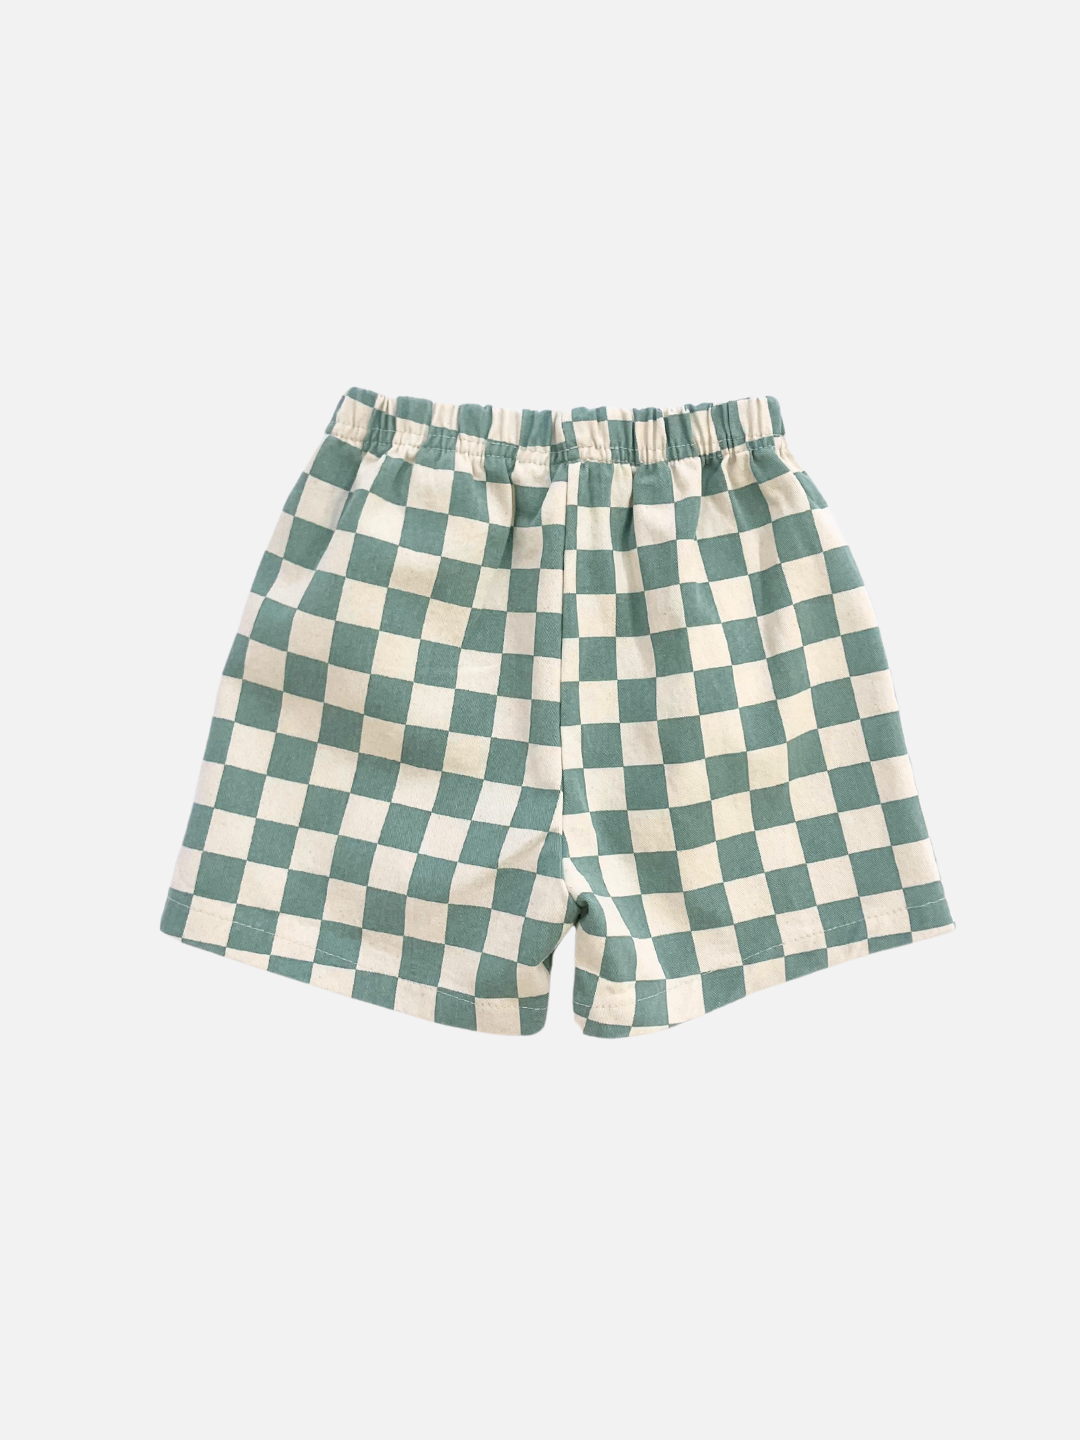 Teal | A back view of the kid's Frankie Short in Teal & Ivory check